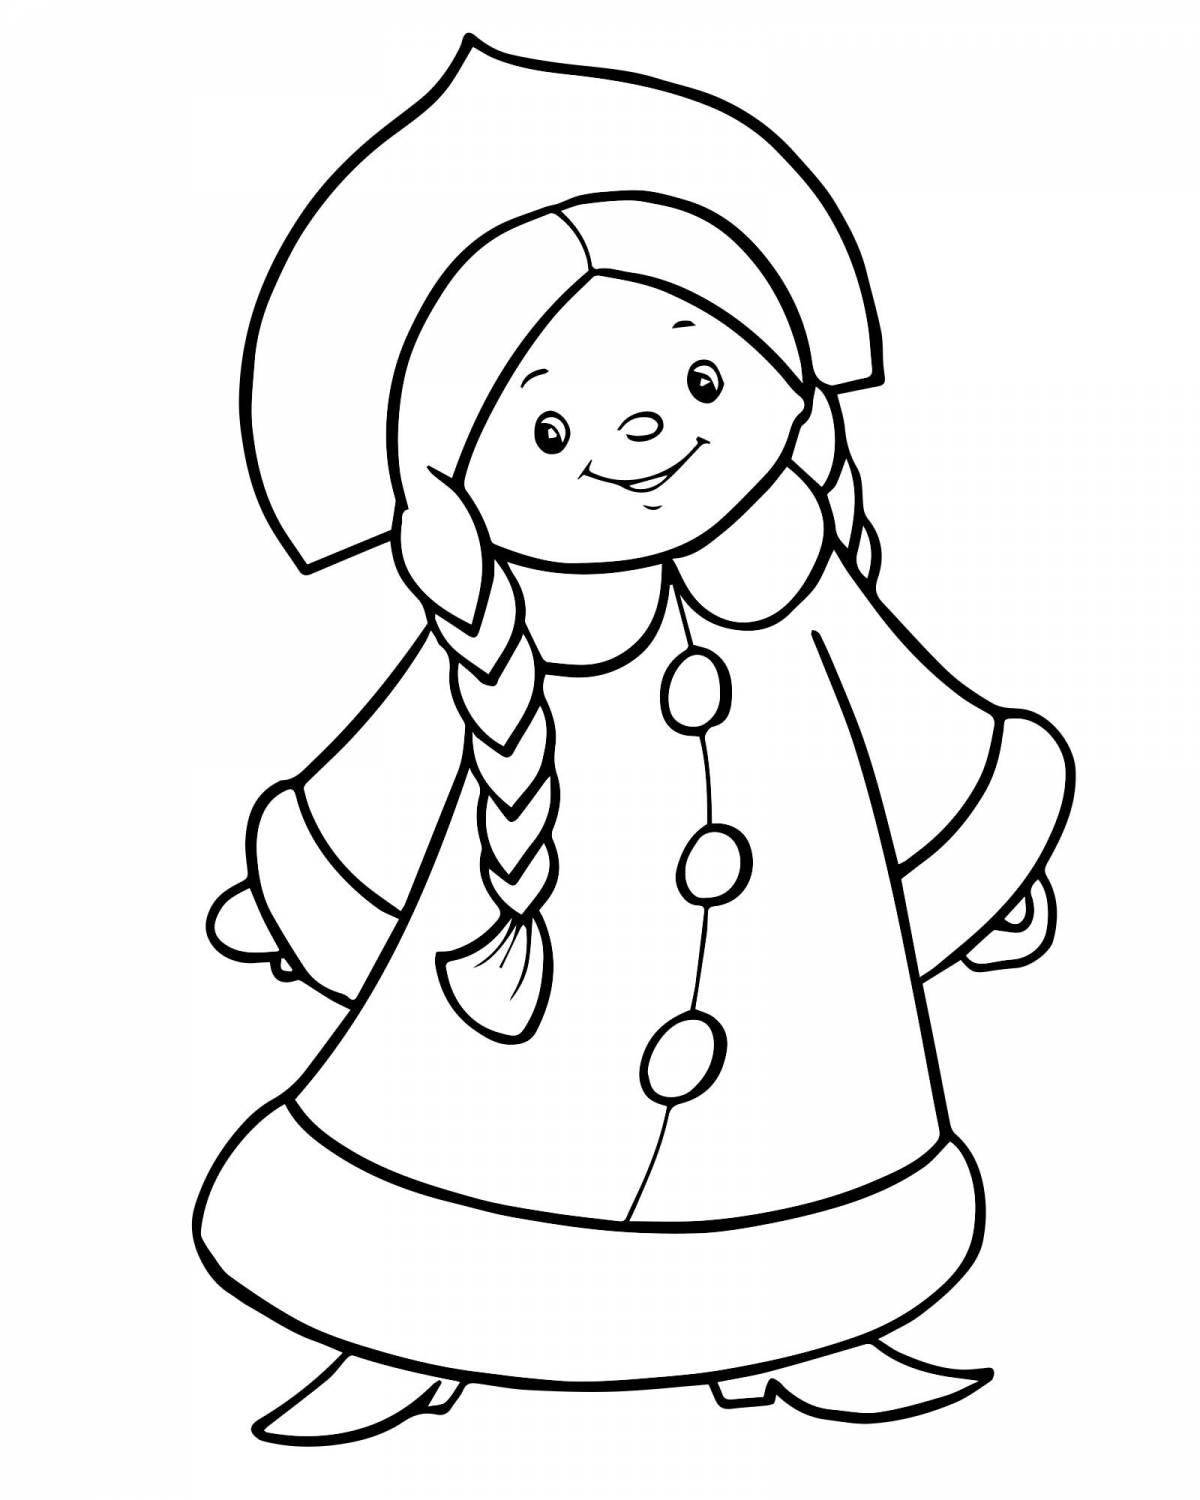 Live coloring drawing of a snow maiden